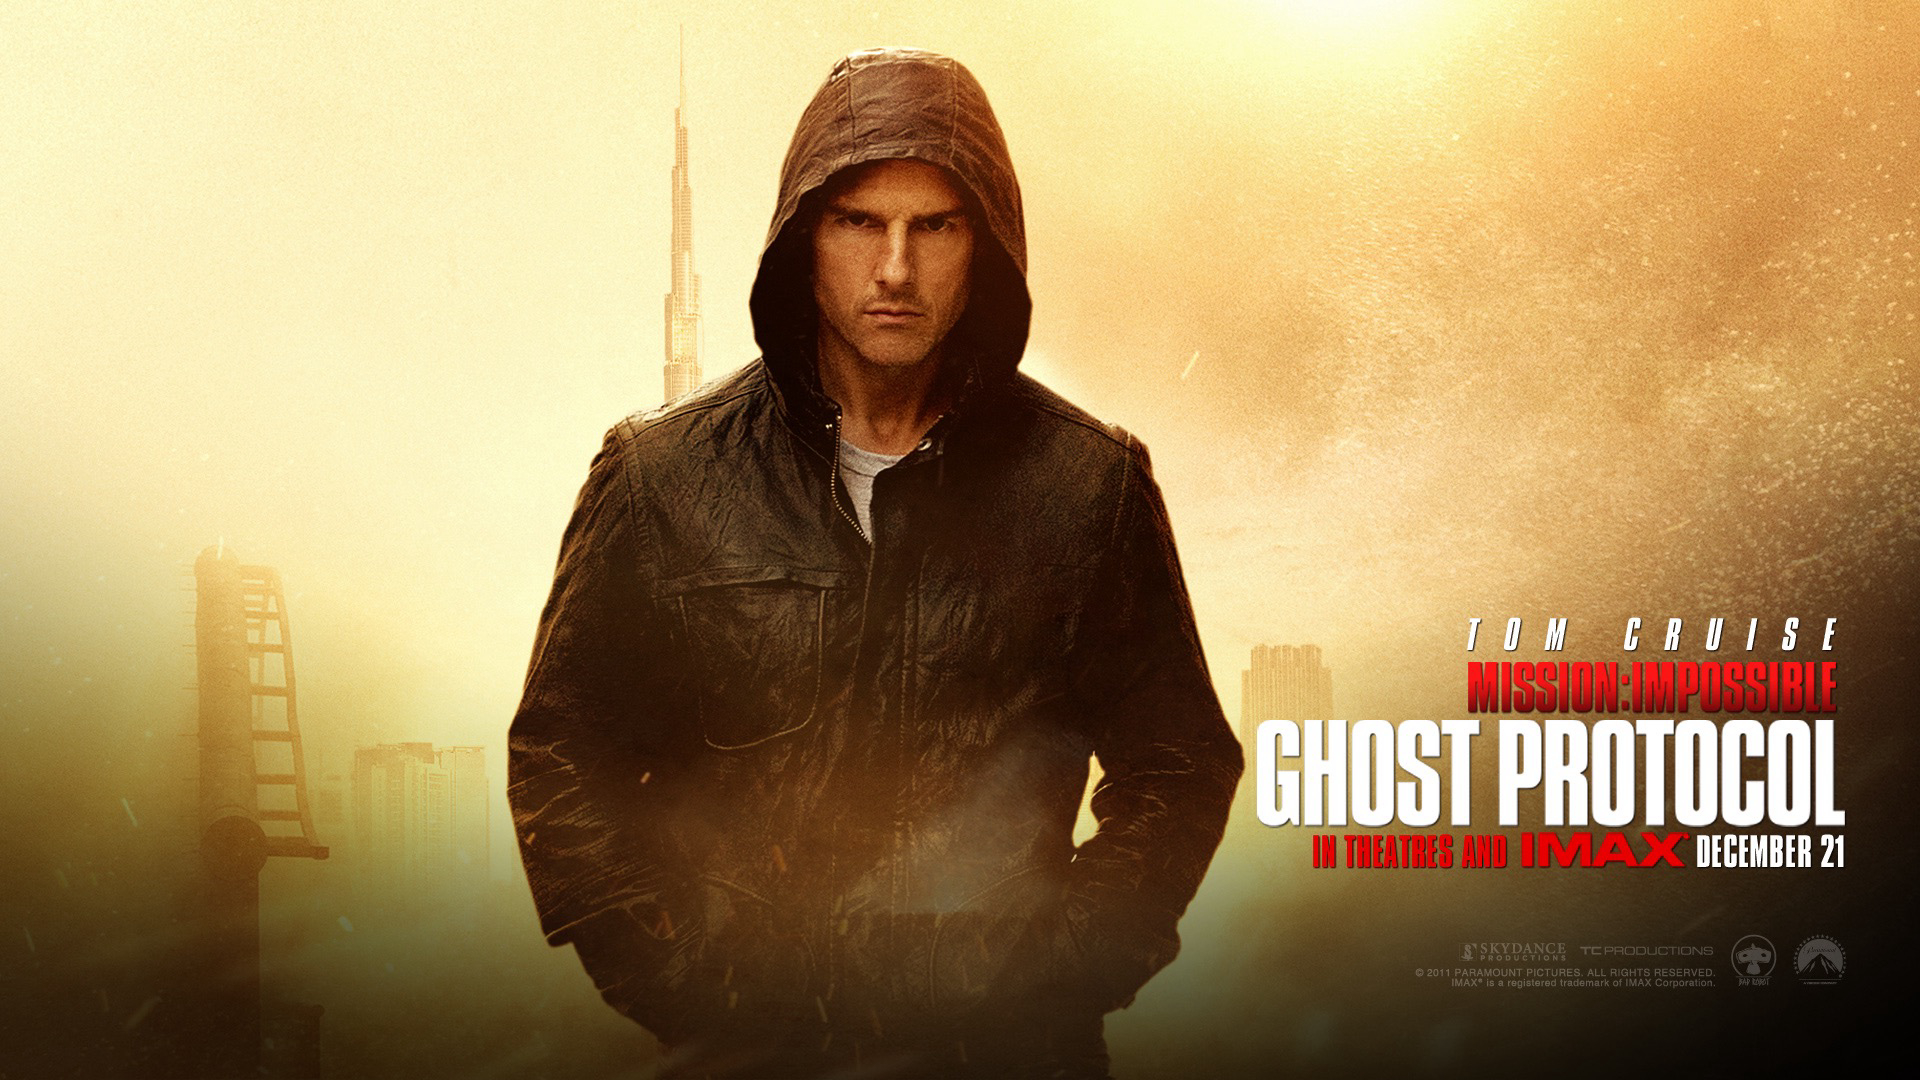 Mission: Impossible - Ghost Protocol / Mission: Impossible - Ghost Protocol (2011)